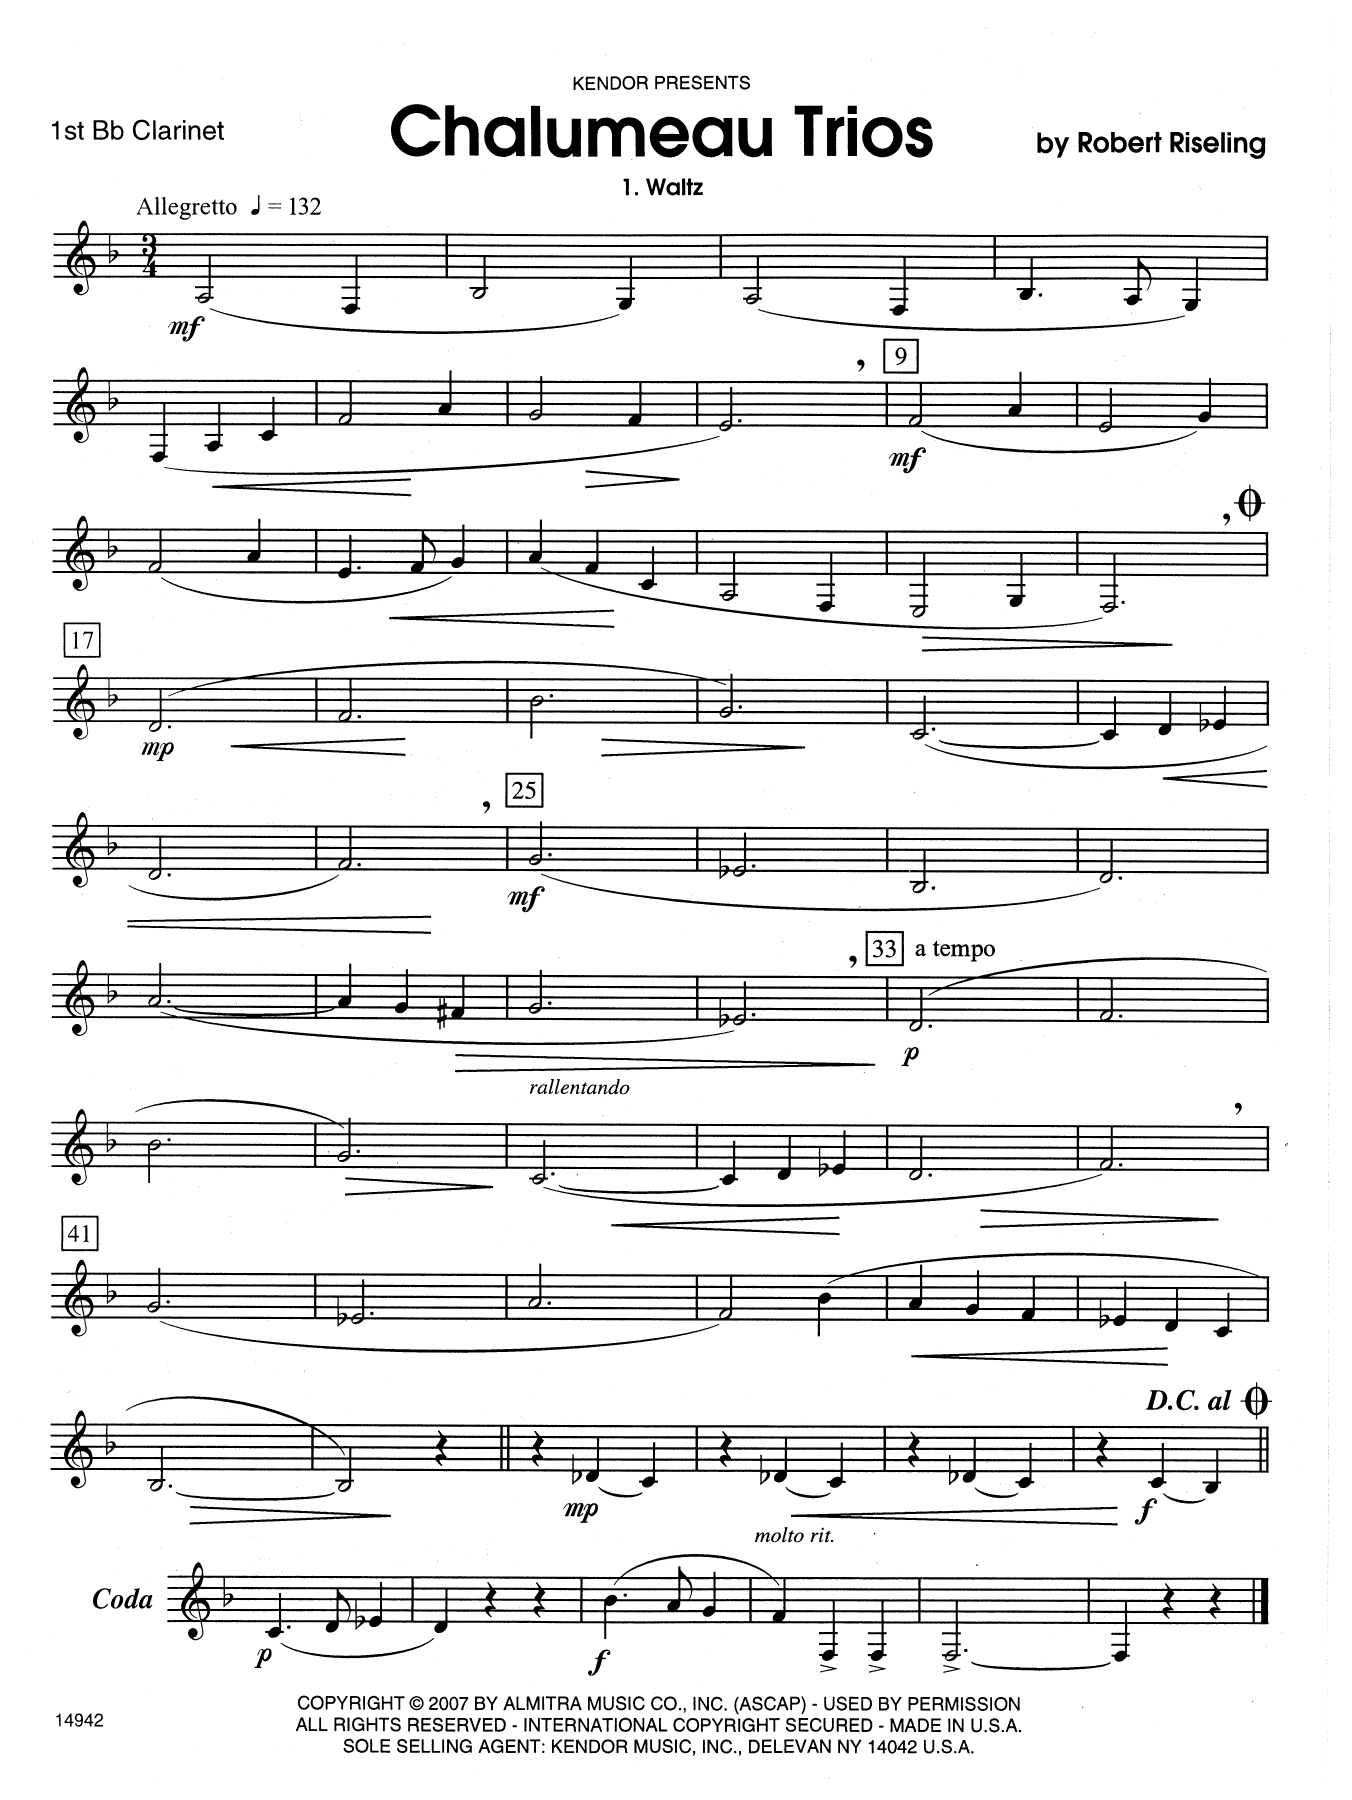 Riseling Chalumeau Trios - 1st Bb Clarinet sheet music notes and chords. Download Printable PDF.